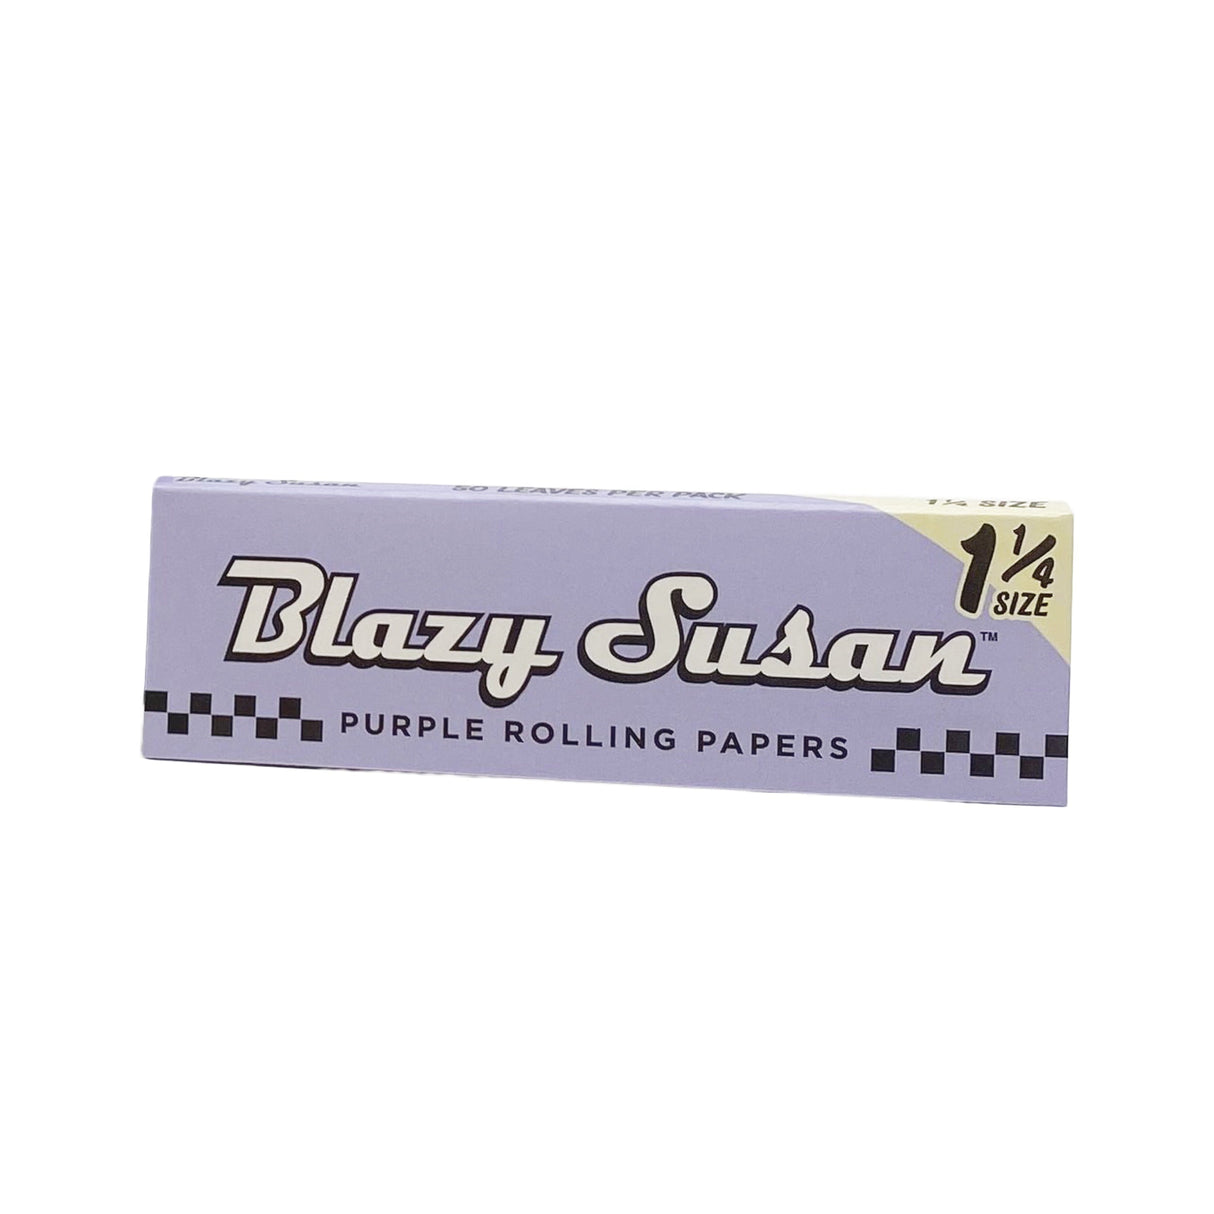 Blazy Susan 1 1/4 Size Purple Rolling Papers Pack Front View